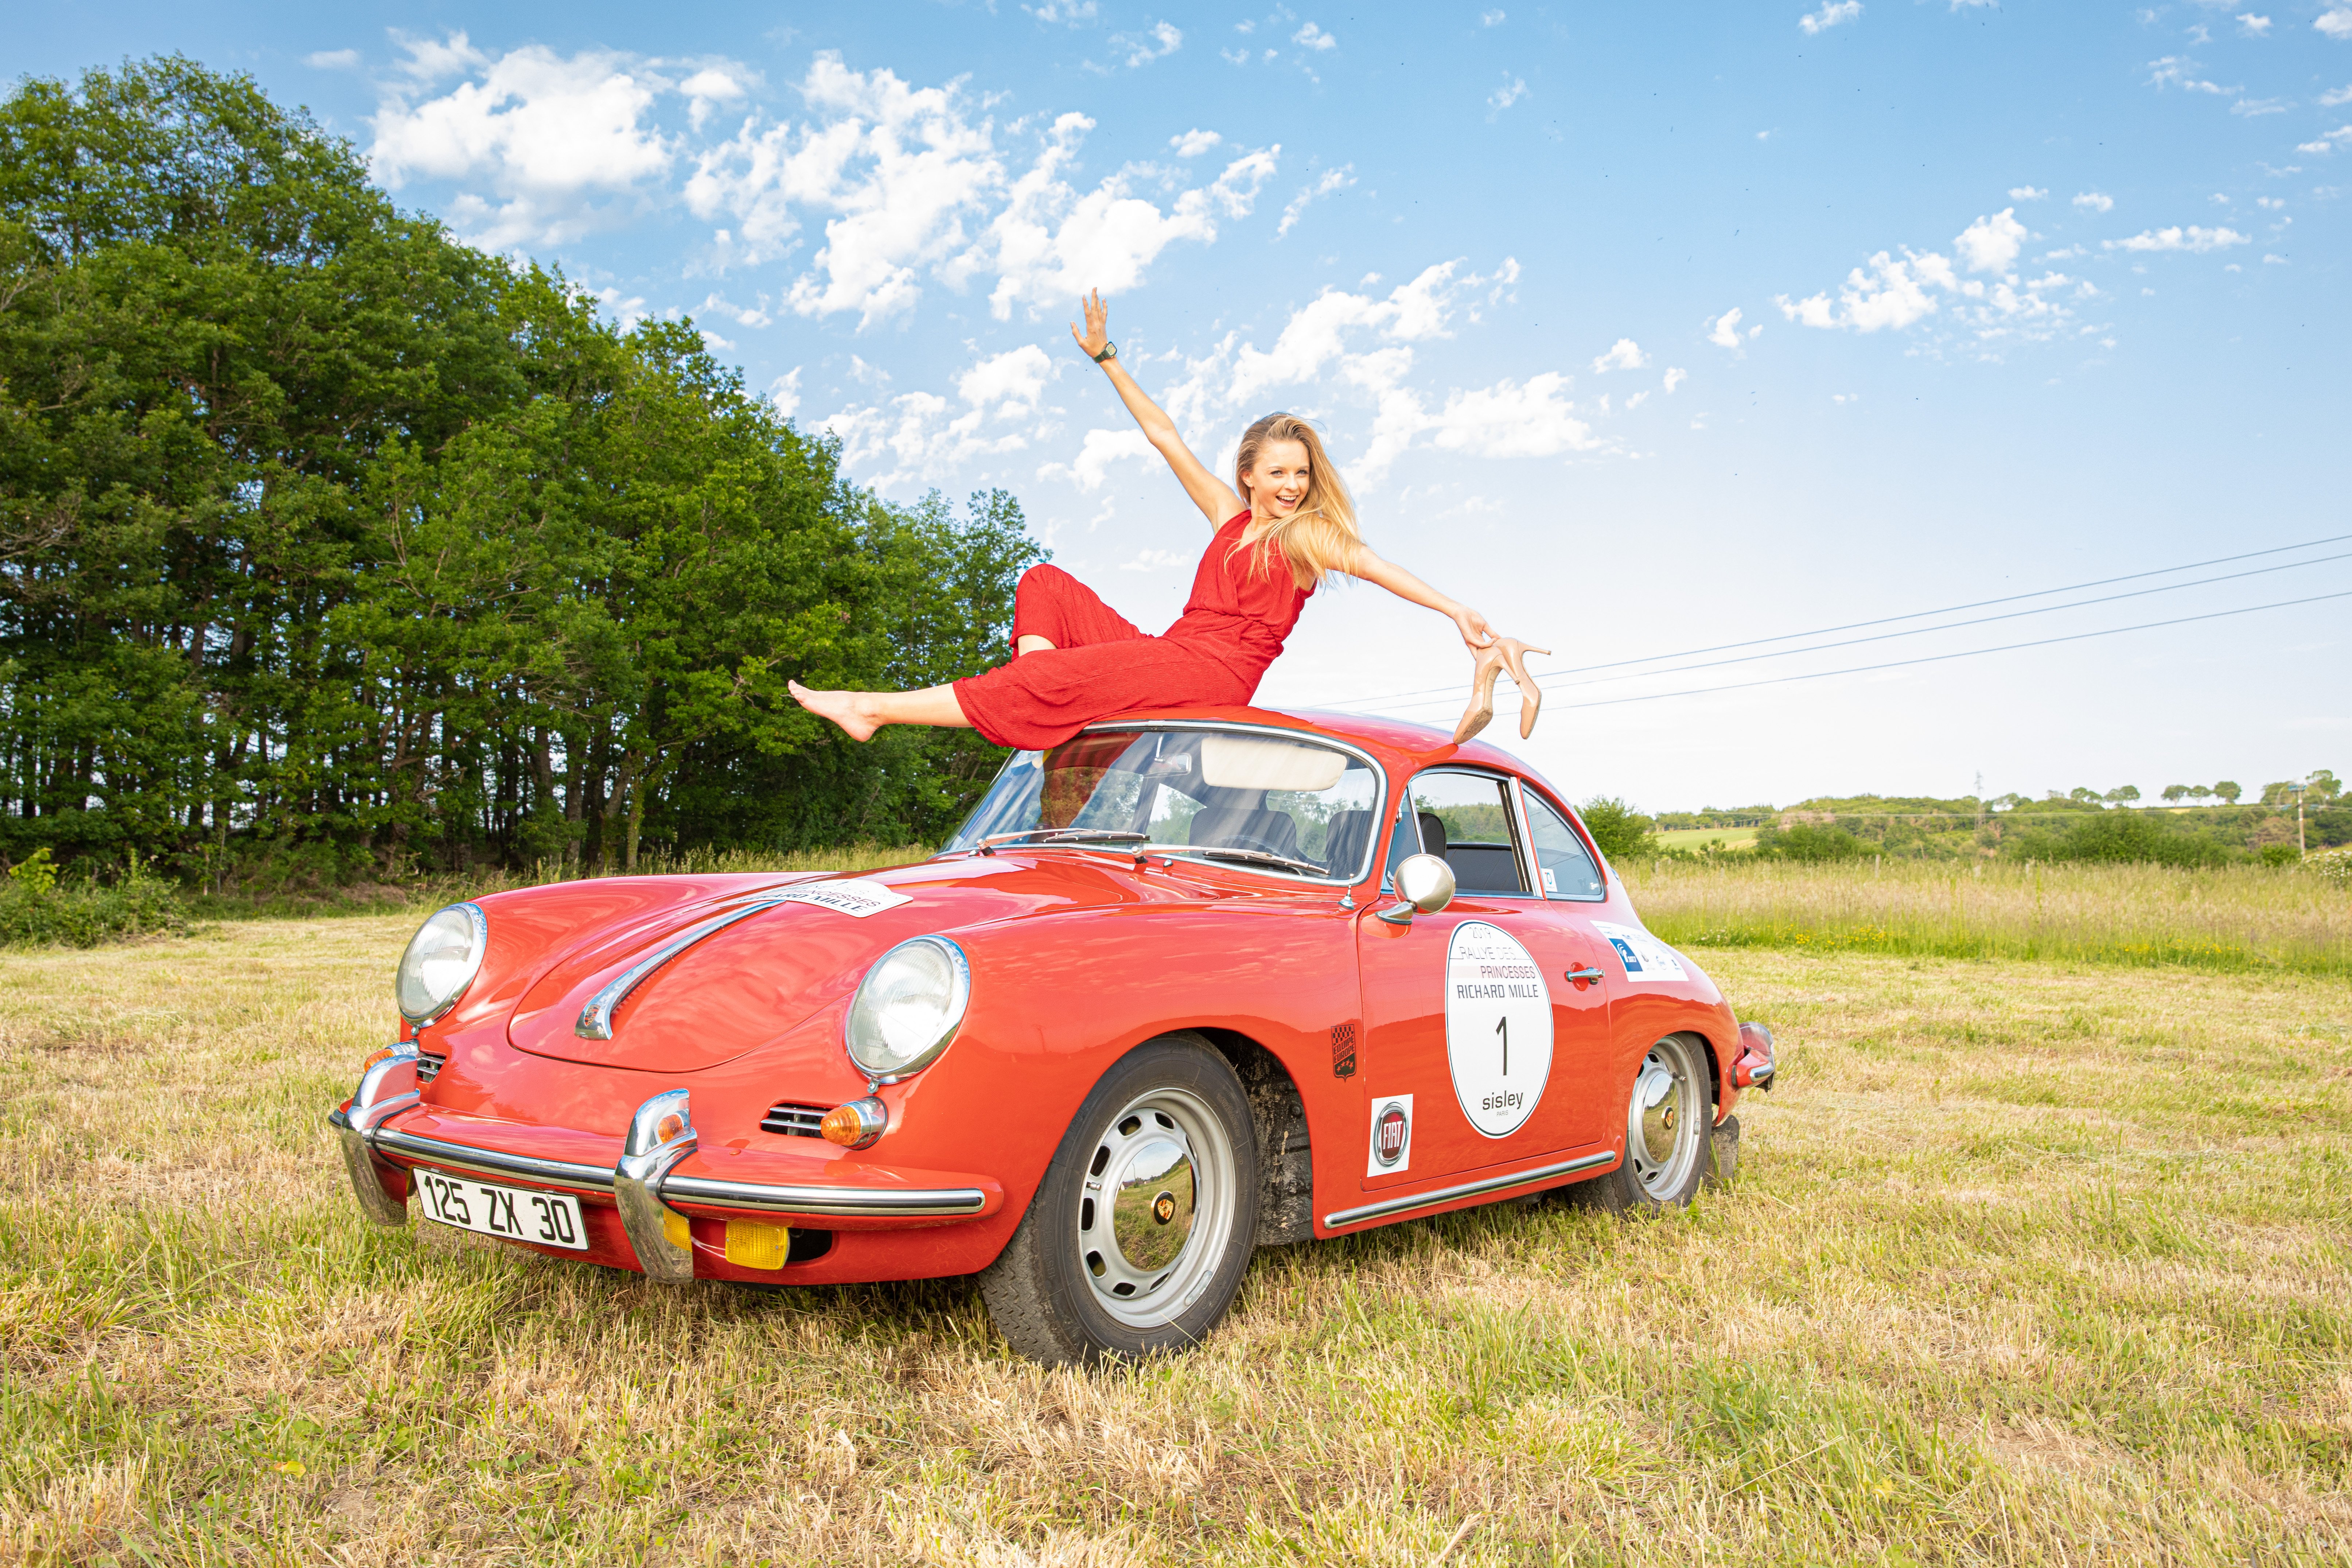 Aurora Straus, the young American driver and partner of the brand, slid behind the wheel of the N°1 car, a red Porsche 356, one of eight Porsches sporting Richard Mille’s livery and dedicated to special guests.